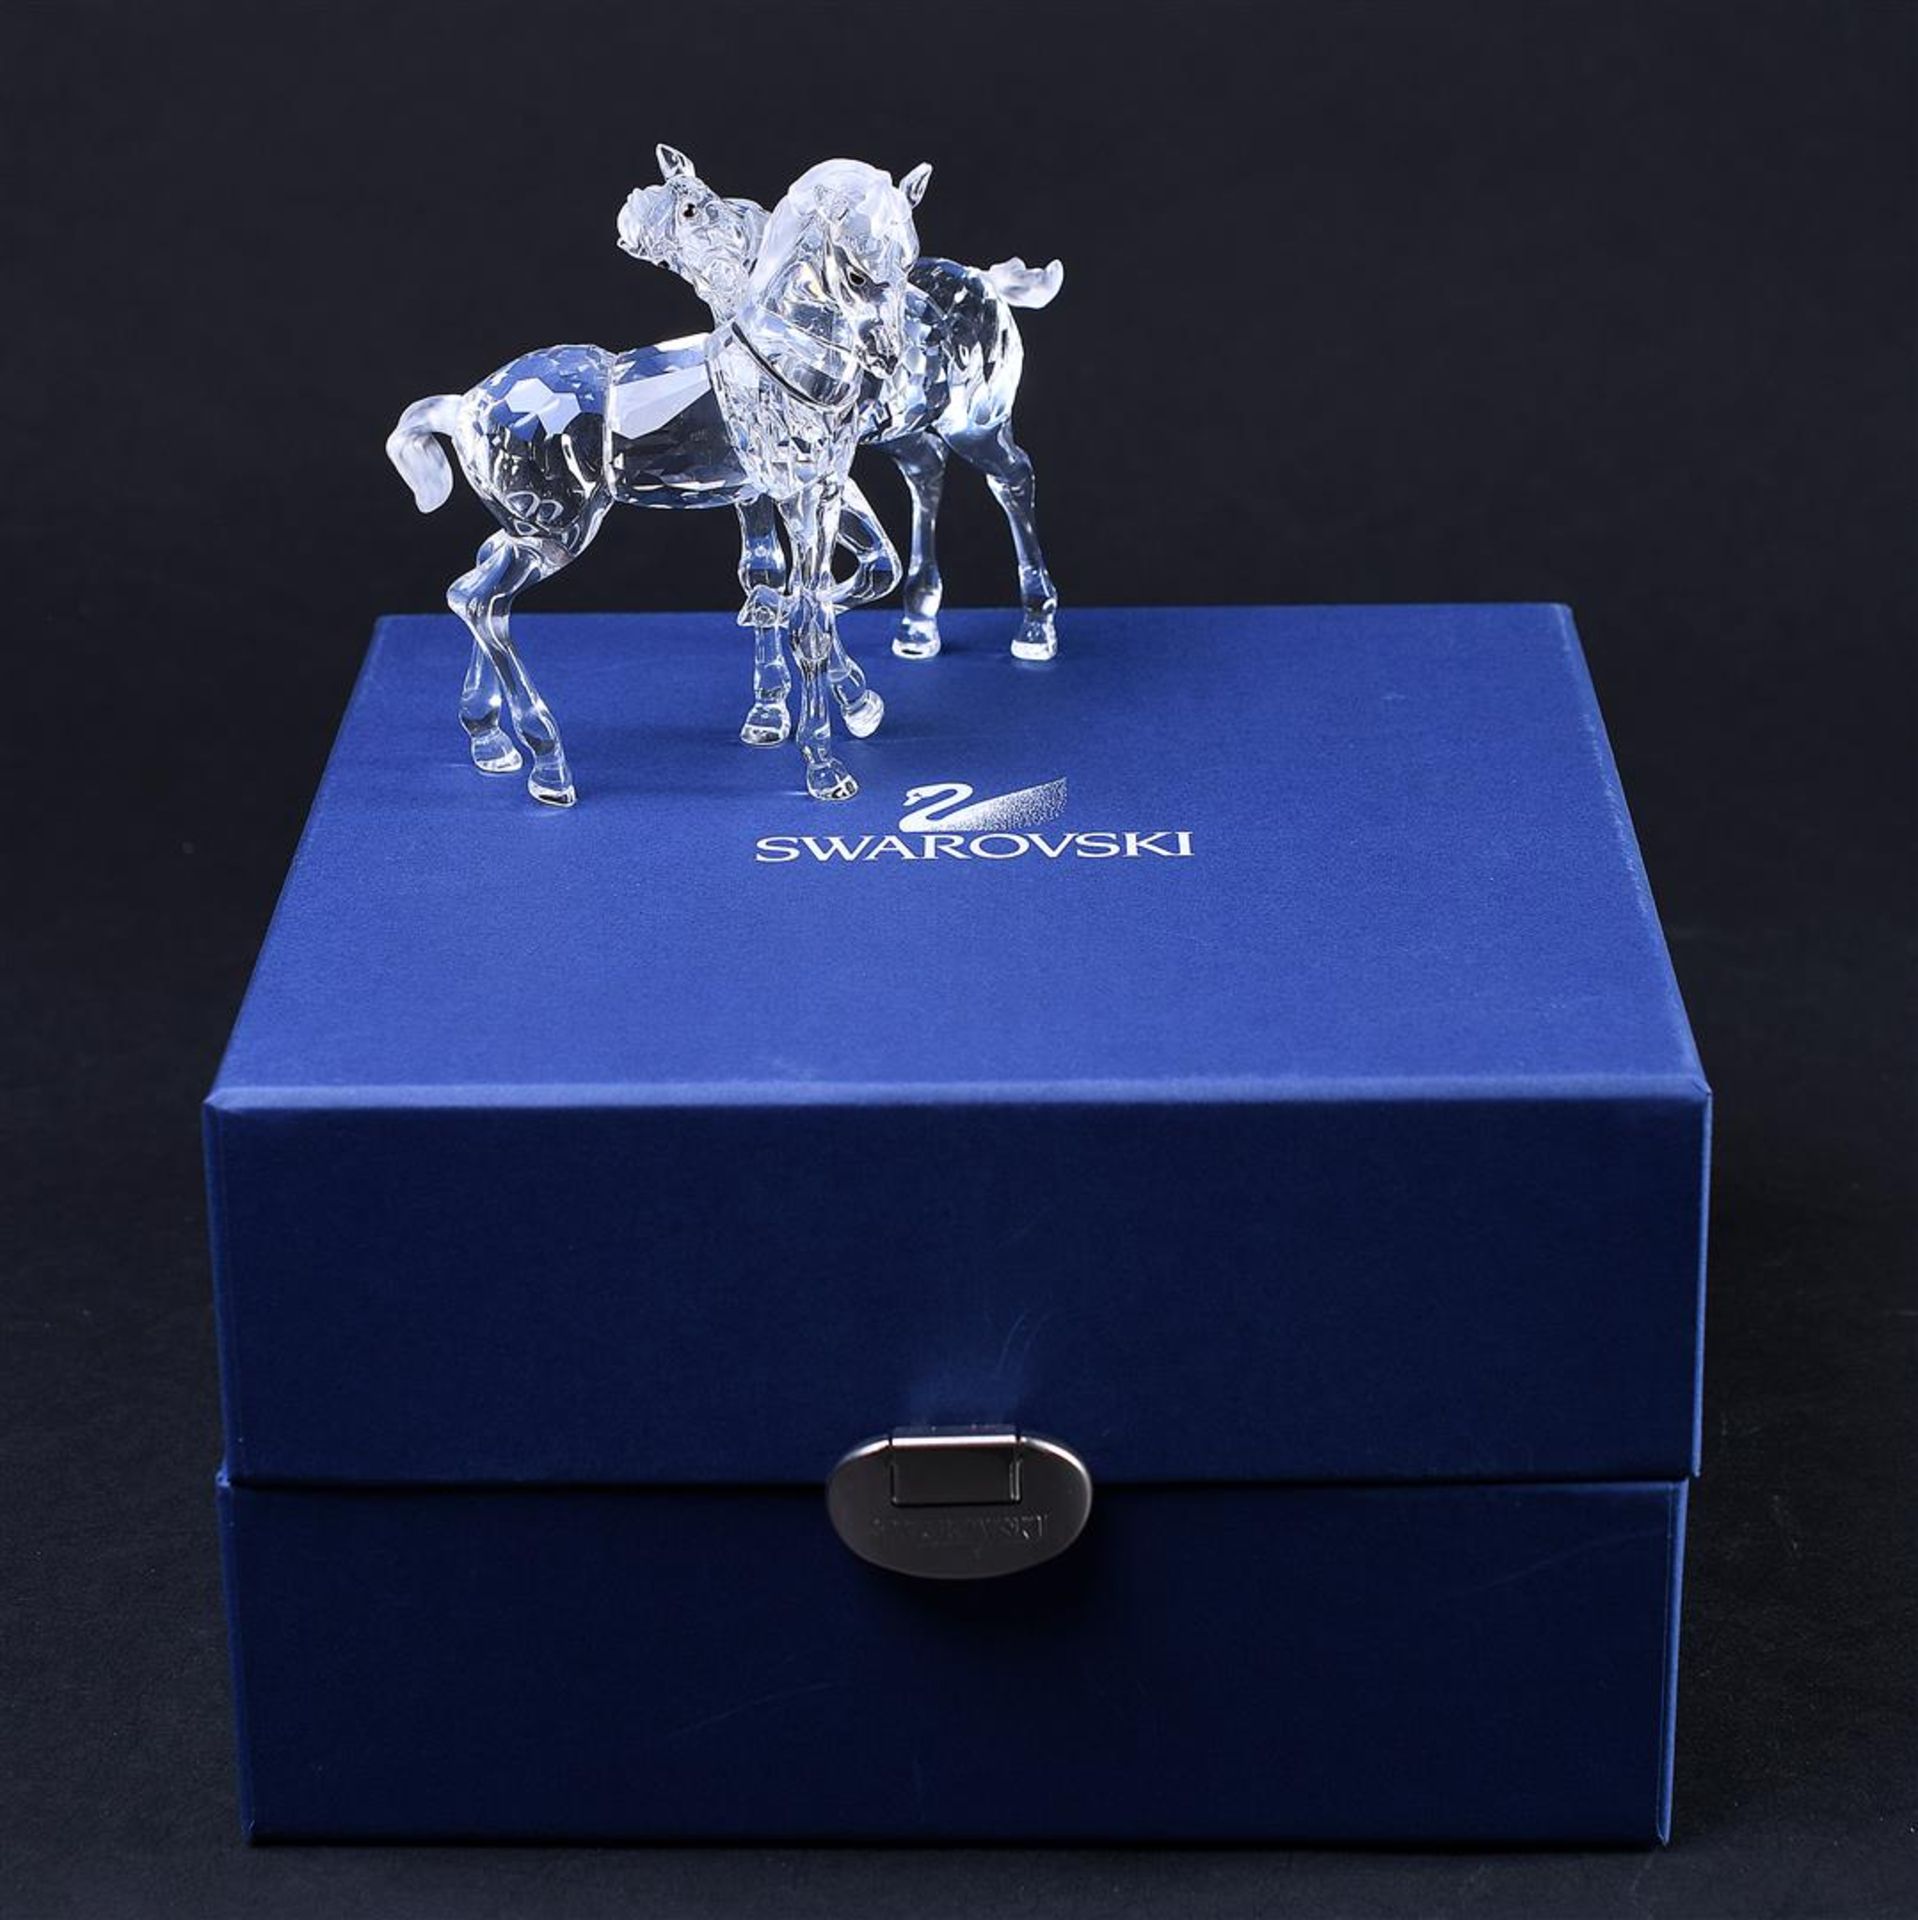 Swarovski, Foals, Year of issue 2003, 627637. Includes original box.
11,9 x 9,2 cm. - Image 5 of 5